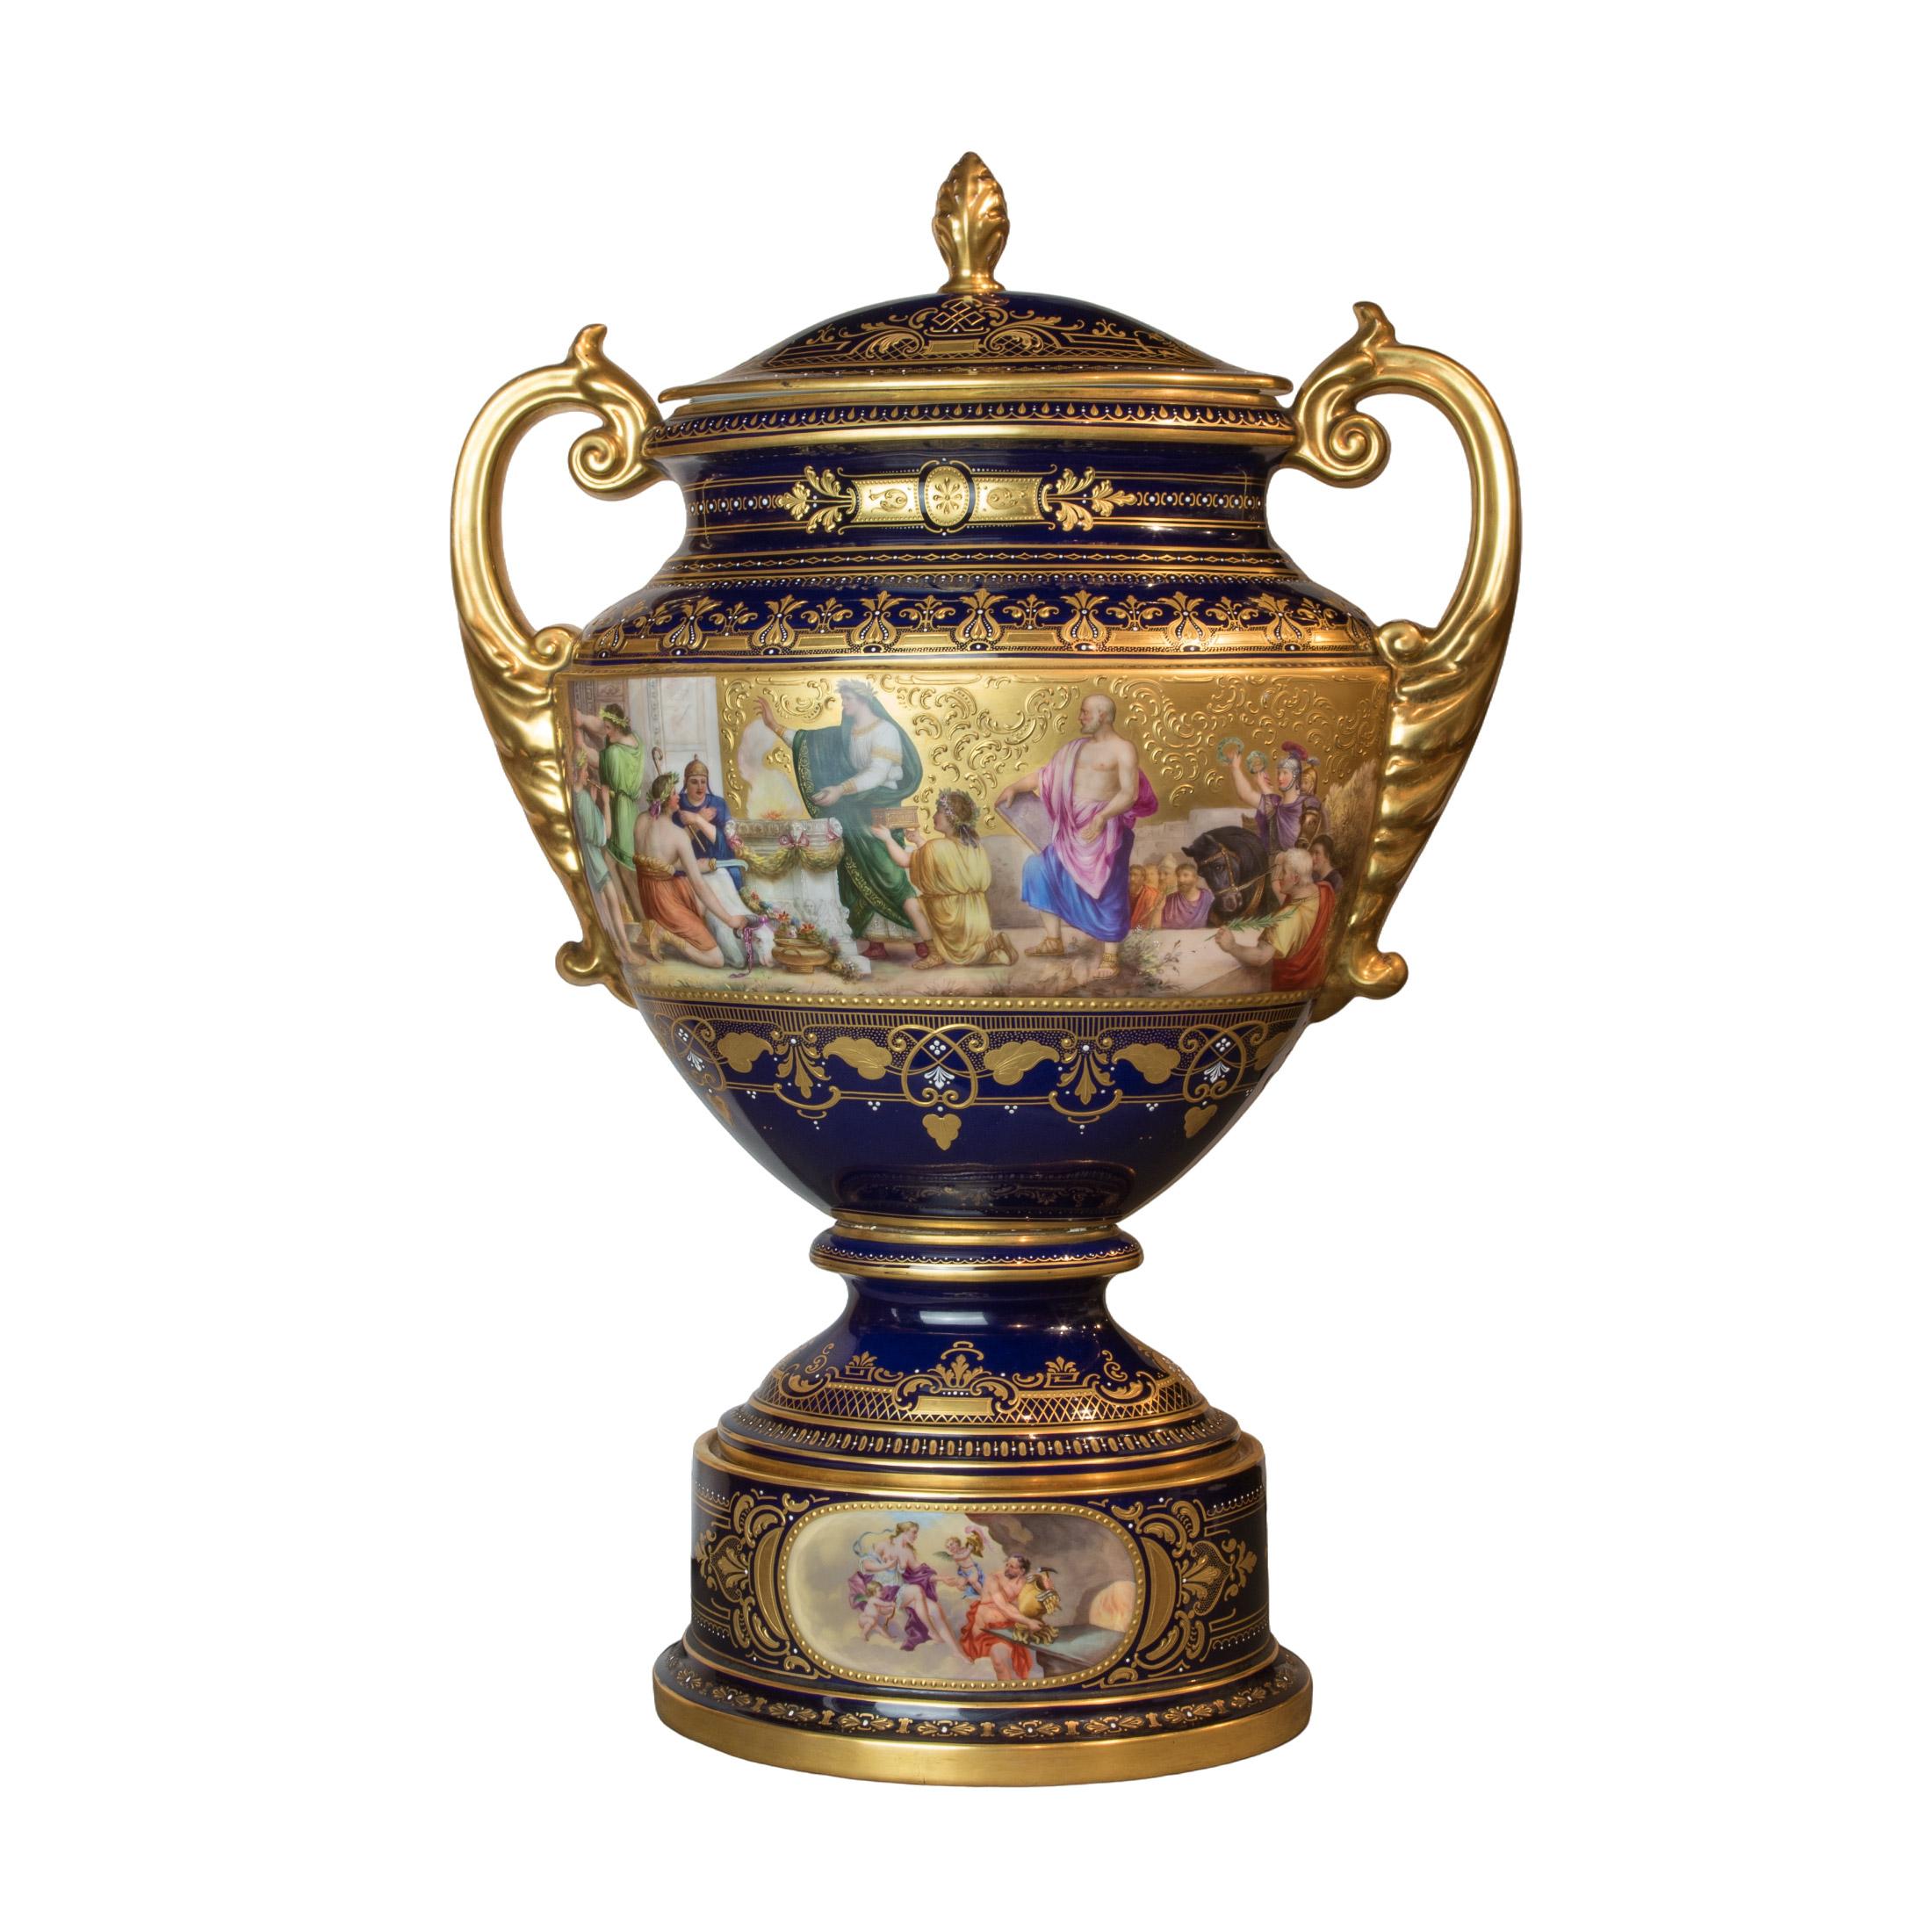 The large urn, signed by artist W. Pfohl, features captivating hand-painted scenes from Shakespearean plays set against a cobalt ground with heavy gold decorations, raised on a pedestal base with ornate figural medallions. The pair of urns exudes